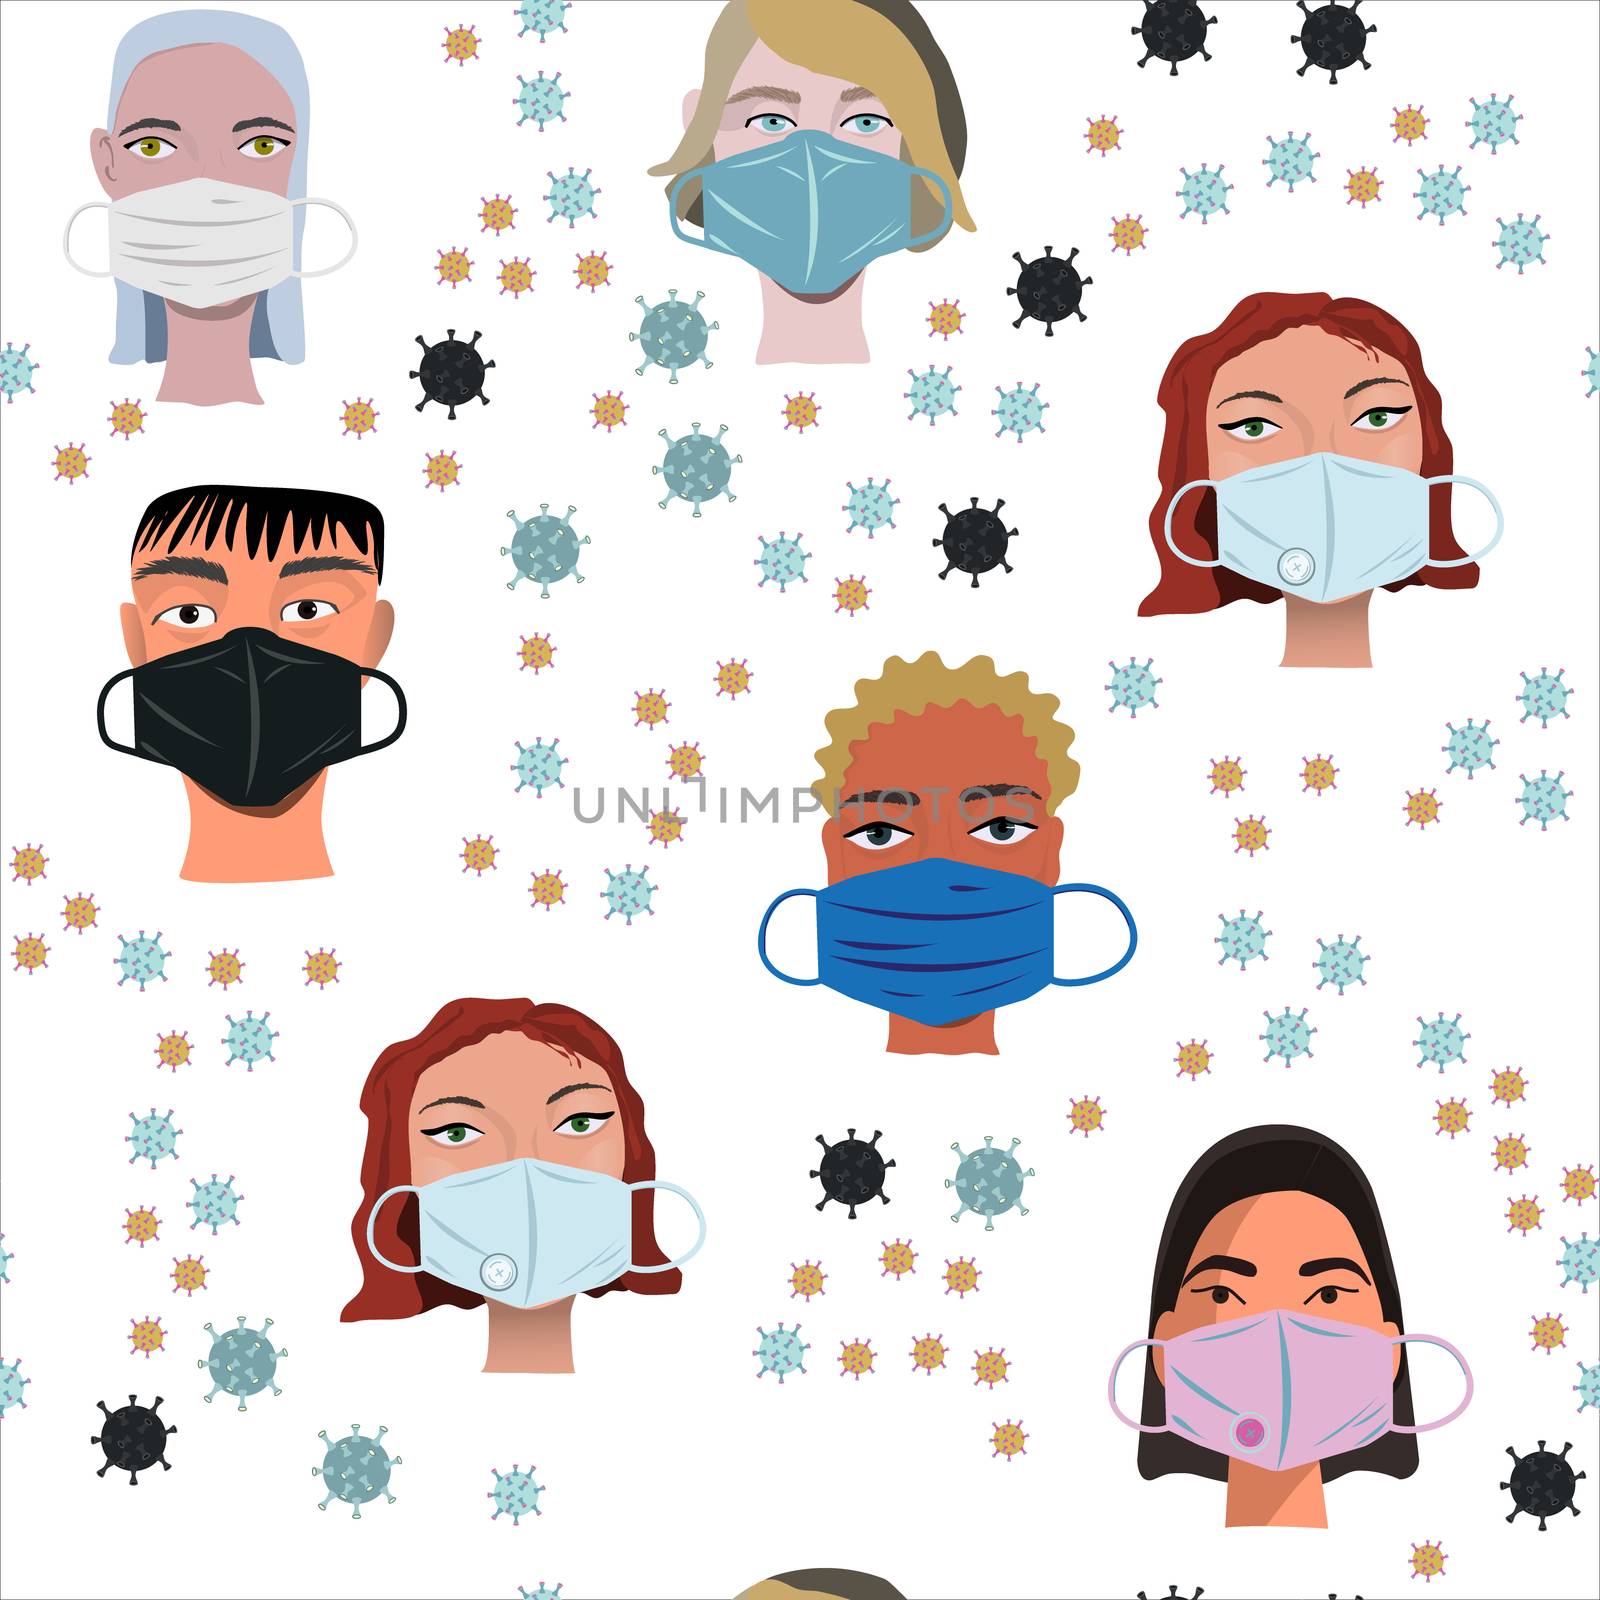 Repeat pattern with multunationality faces wearing protective face mask. Latest trend news, fashion bloggers post. Flat cartoon illustration with copyspace on white background. Vector illustration.